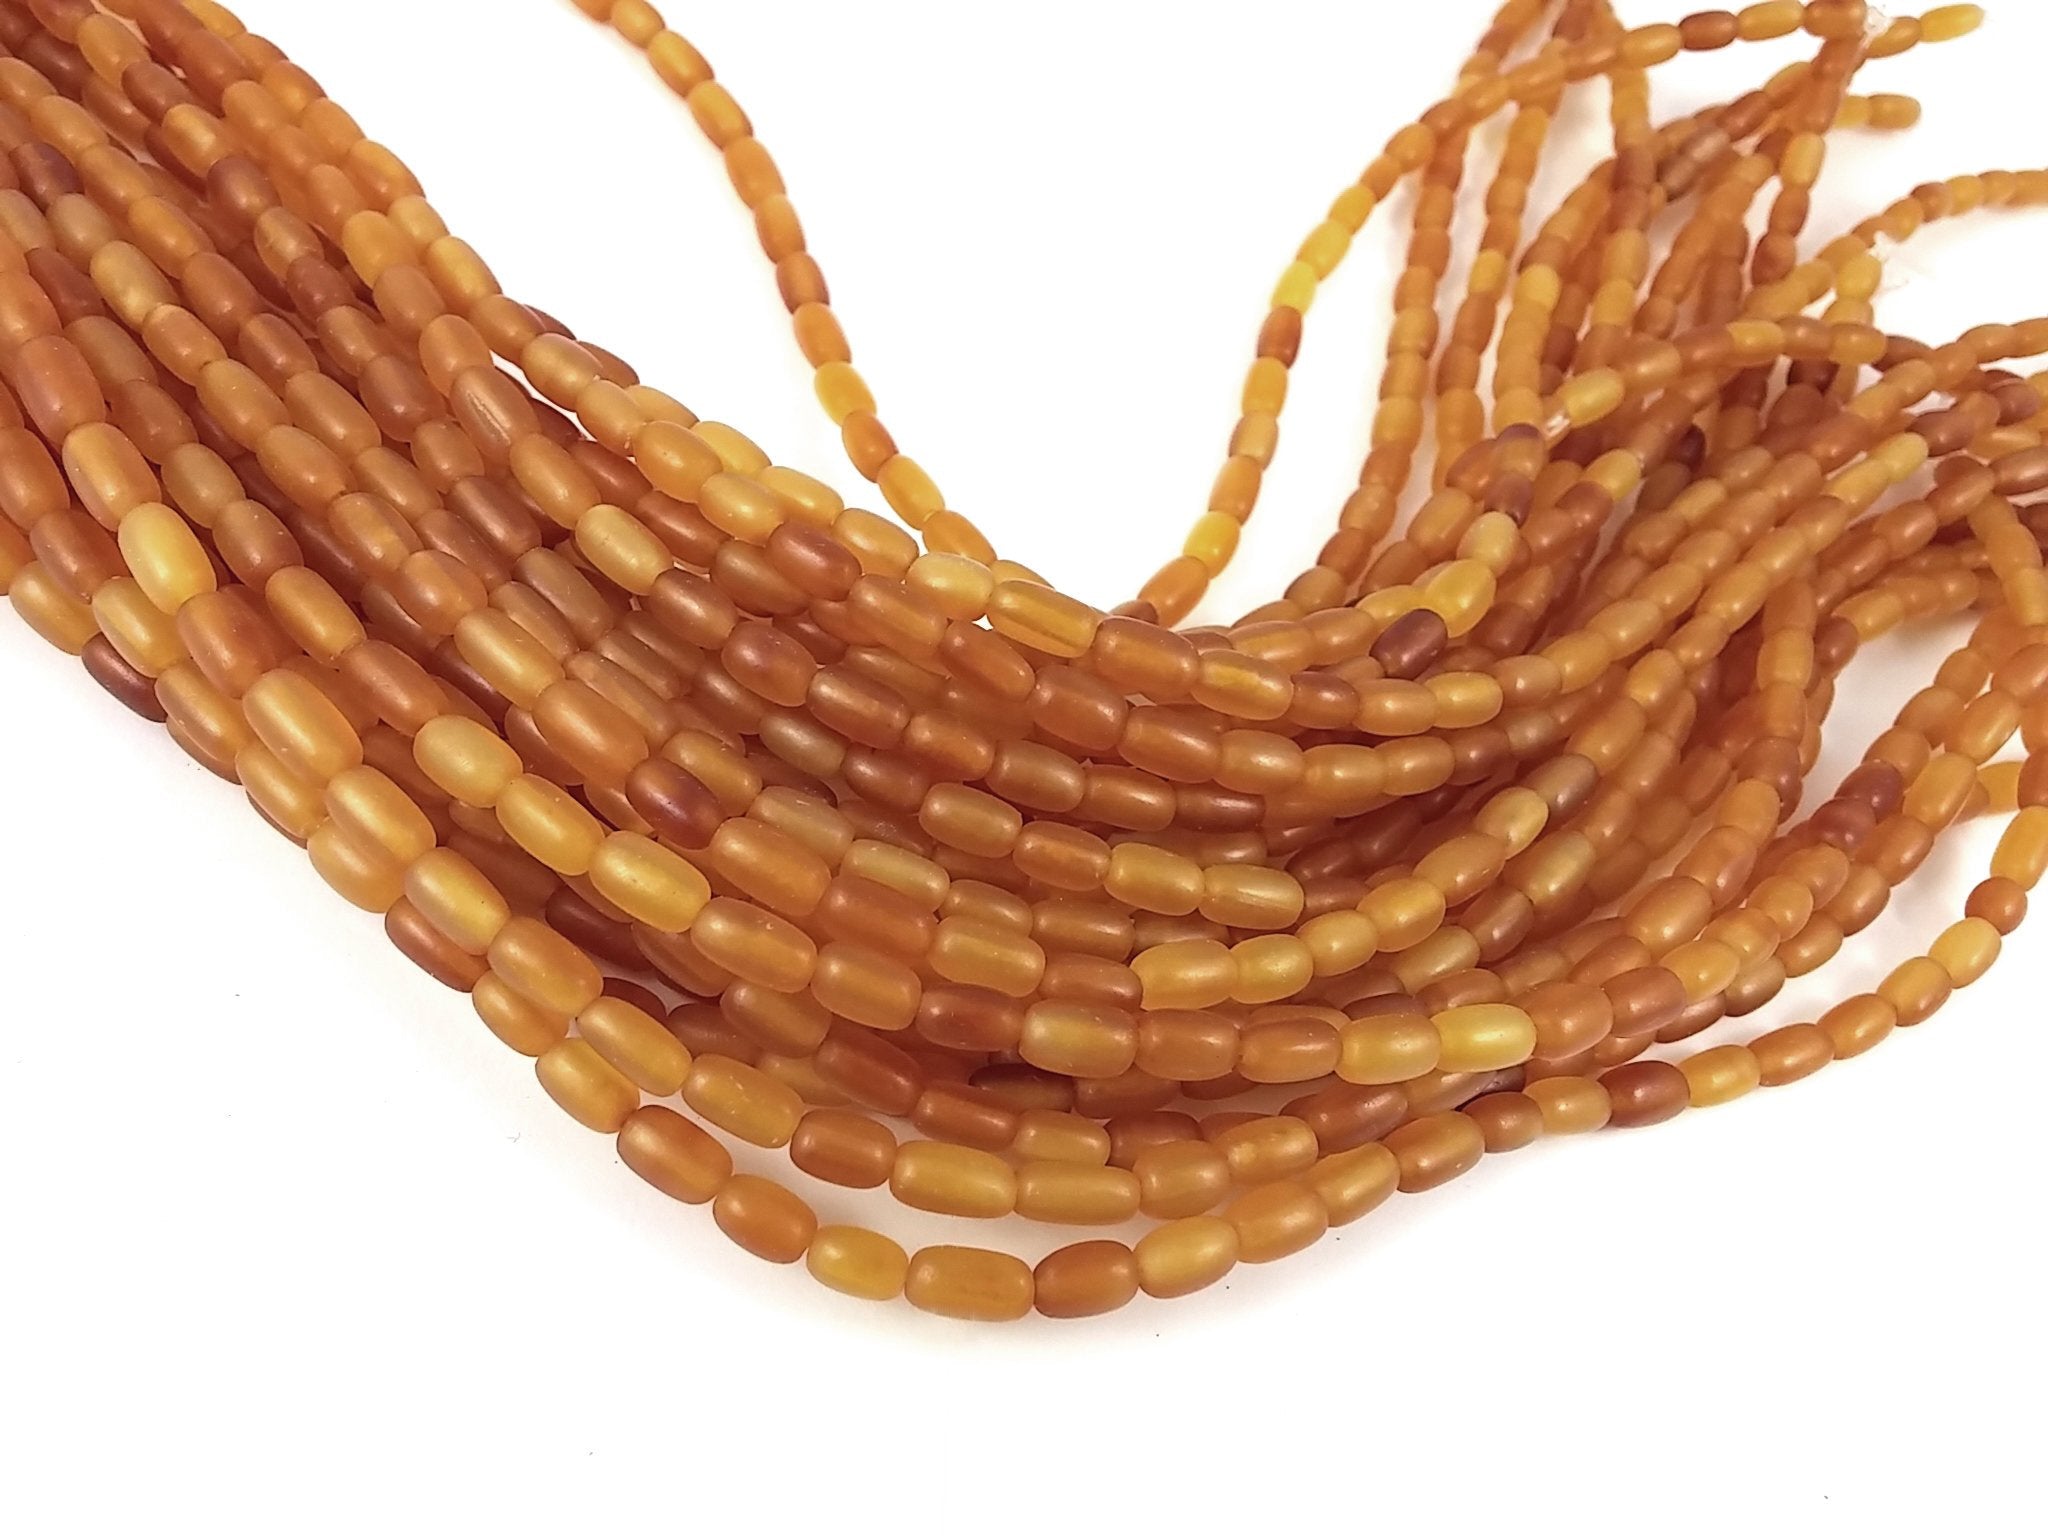 60 Natural amber horn rice beads 7x4mm - eco friendly and natural horn beads